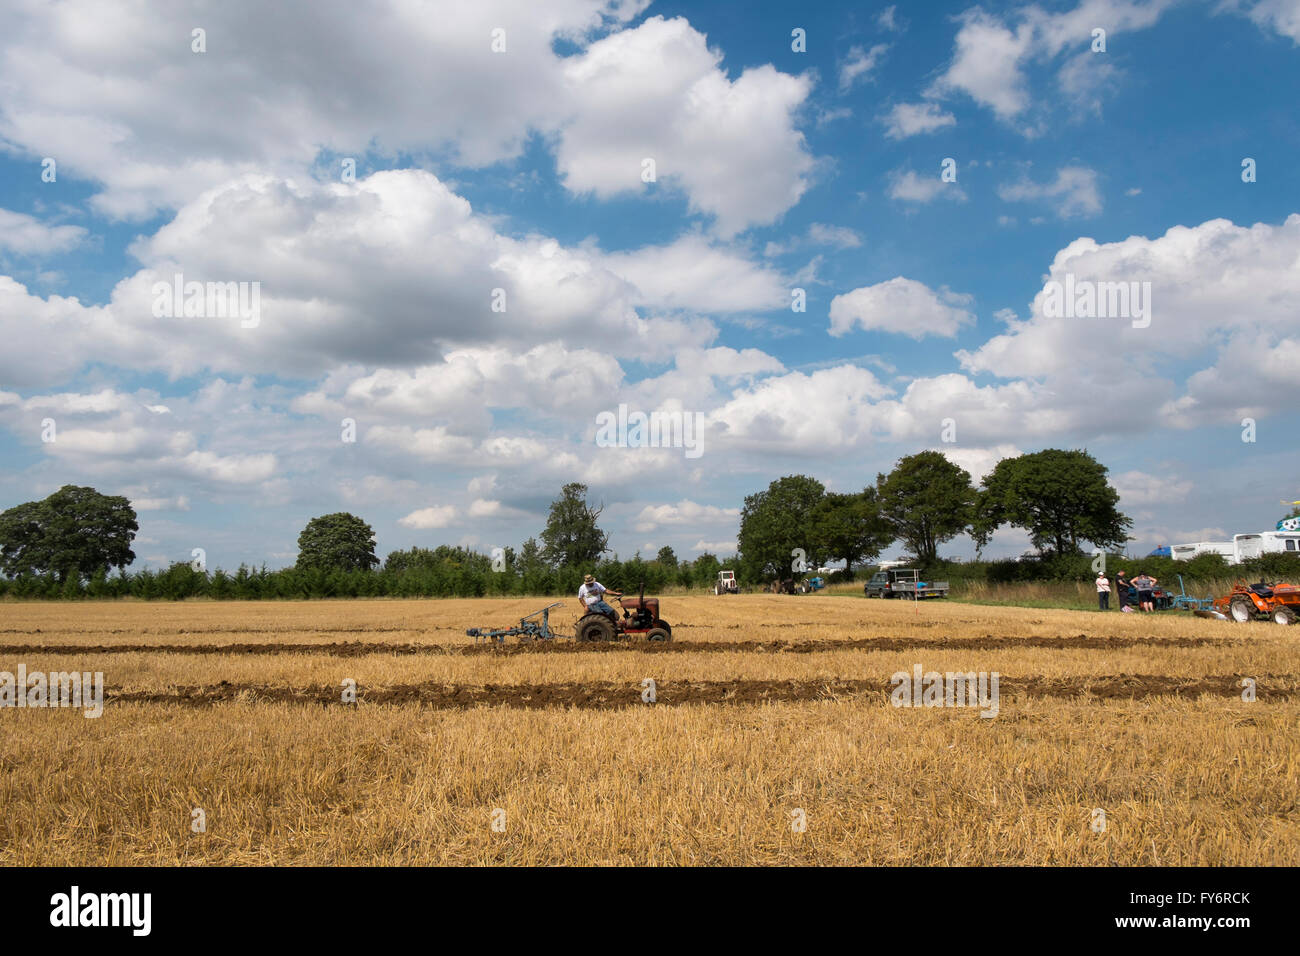 Man driving a small vintage tractor ploughing a field at the Fairford Steam Rally, Gloucestershire, UK Stock Photo